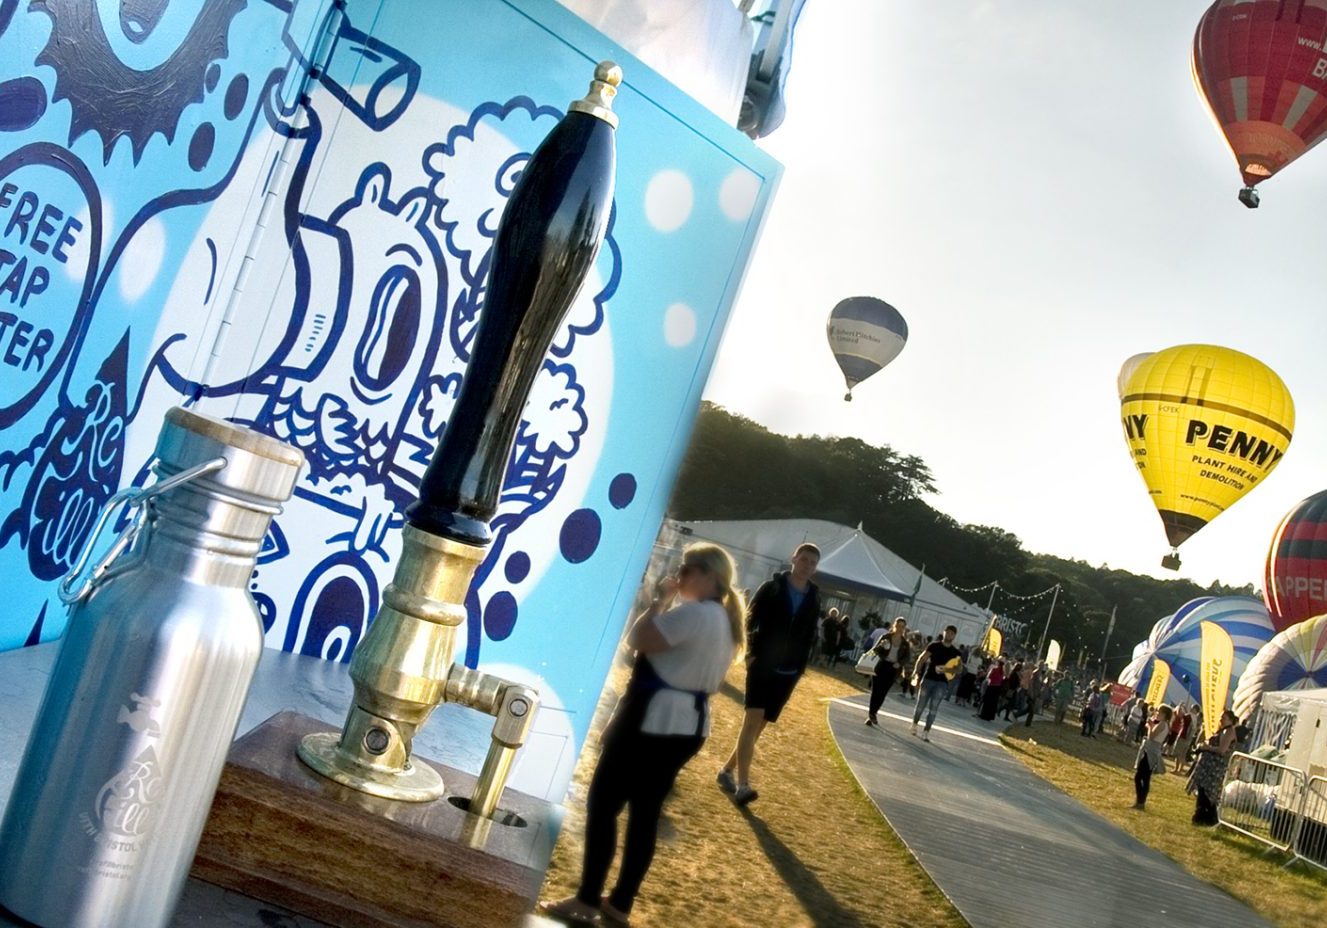 A reusable water bottle next to a water pump at a festival with balloons in the sky behind it